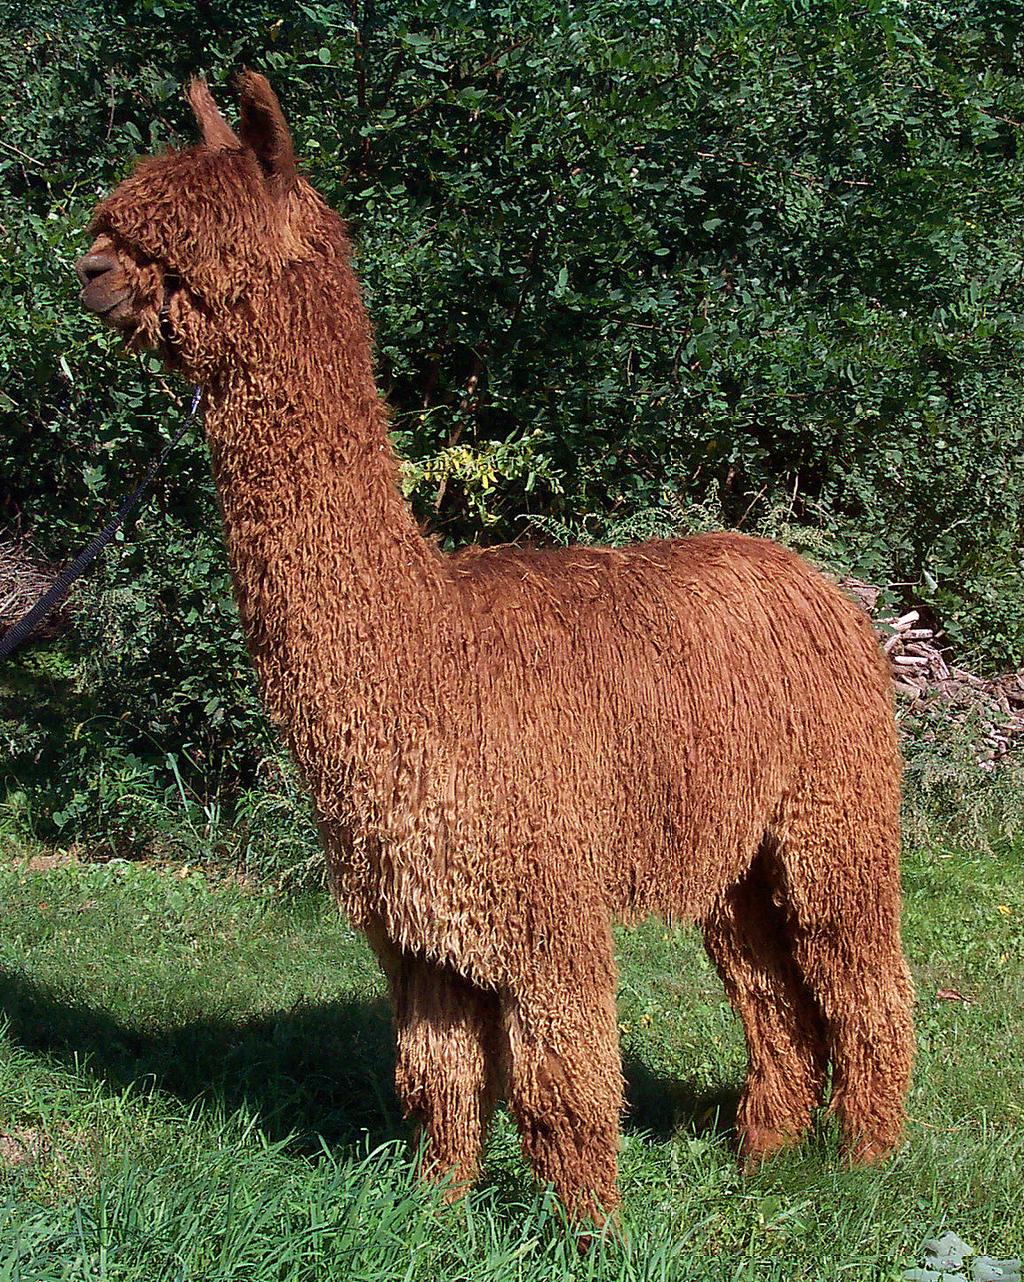 The Suri Breed Standard The Suri alpaca phenotype is a product of breeding between a Suri alpaca male and female with the goal being generational improvement towards the ideal.